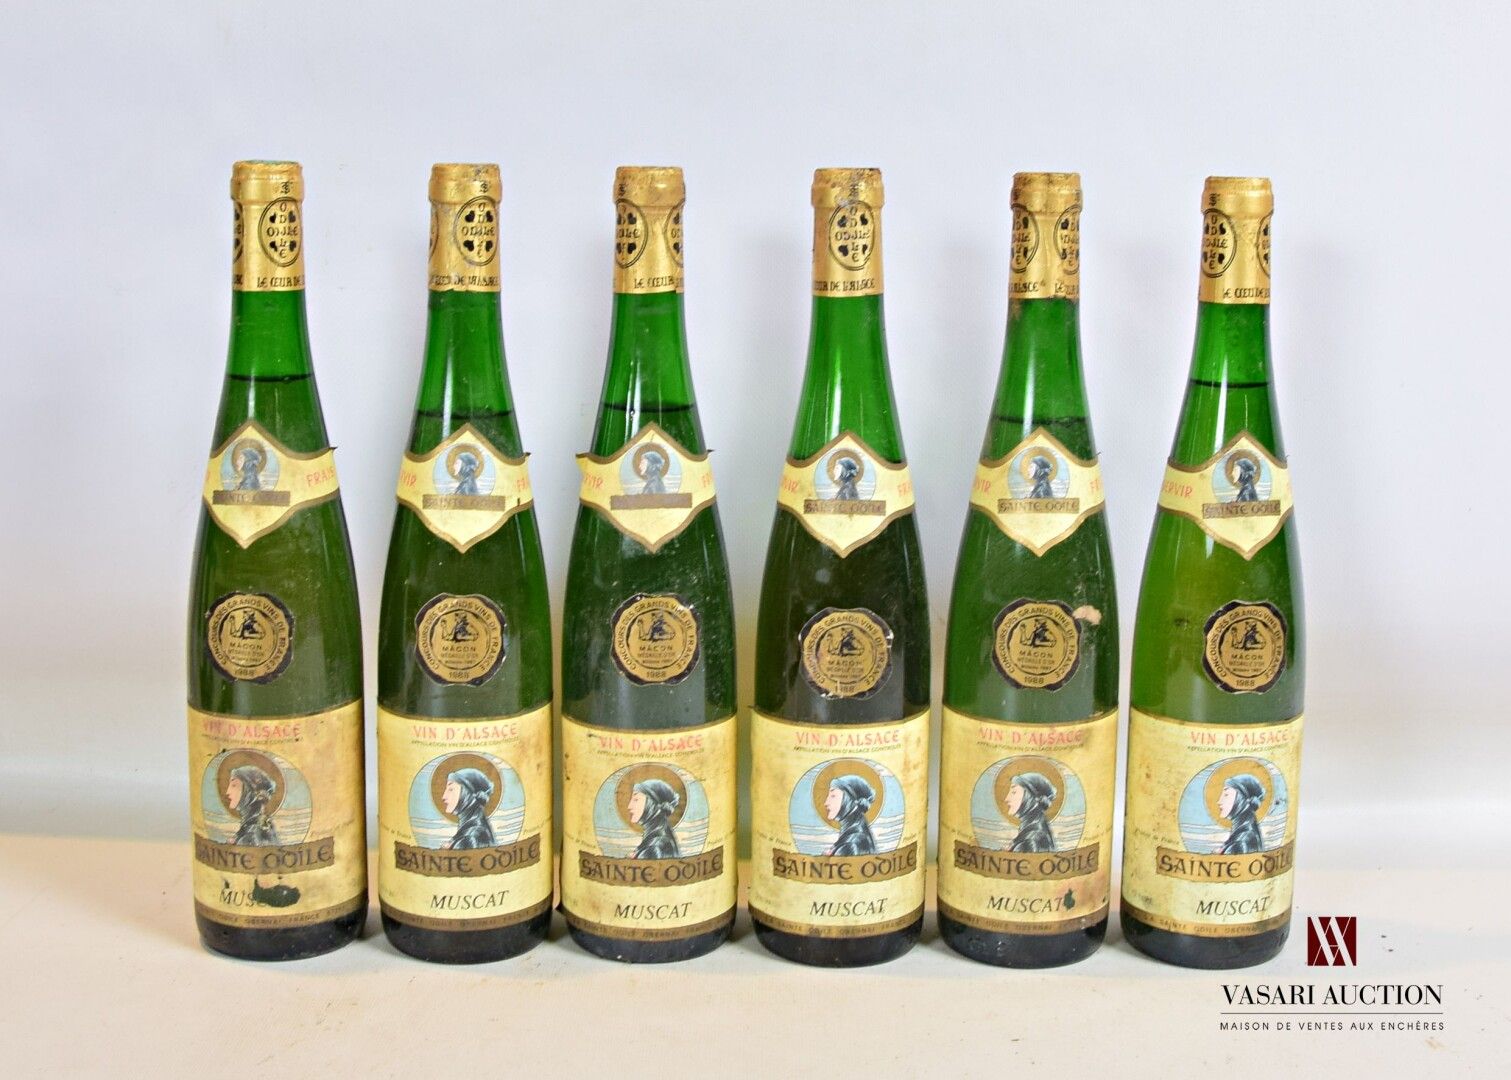 Null 6 bottles MUSCAT d'Alsace mise Ste Odile 1988

	Gold medal in Macon. And. F&hellip;